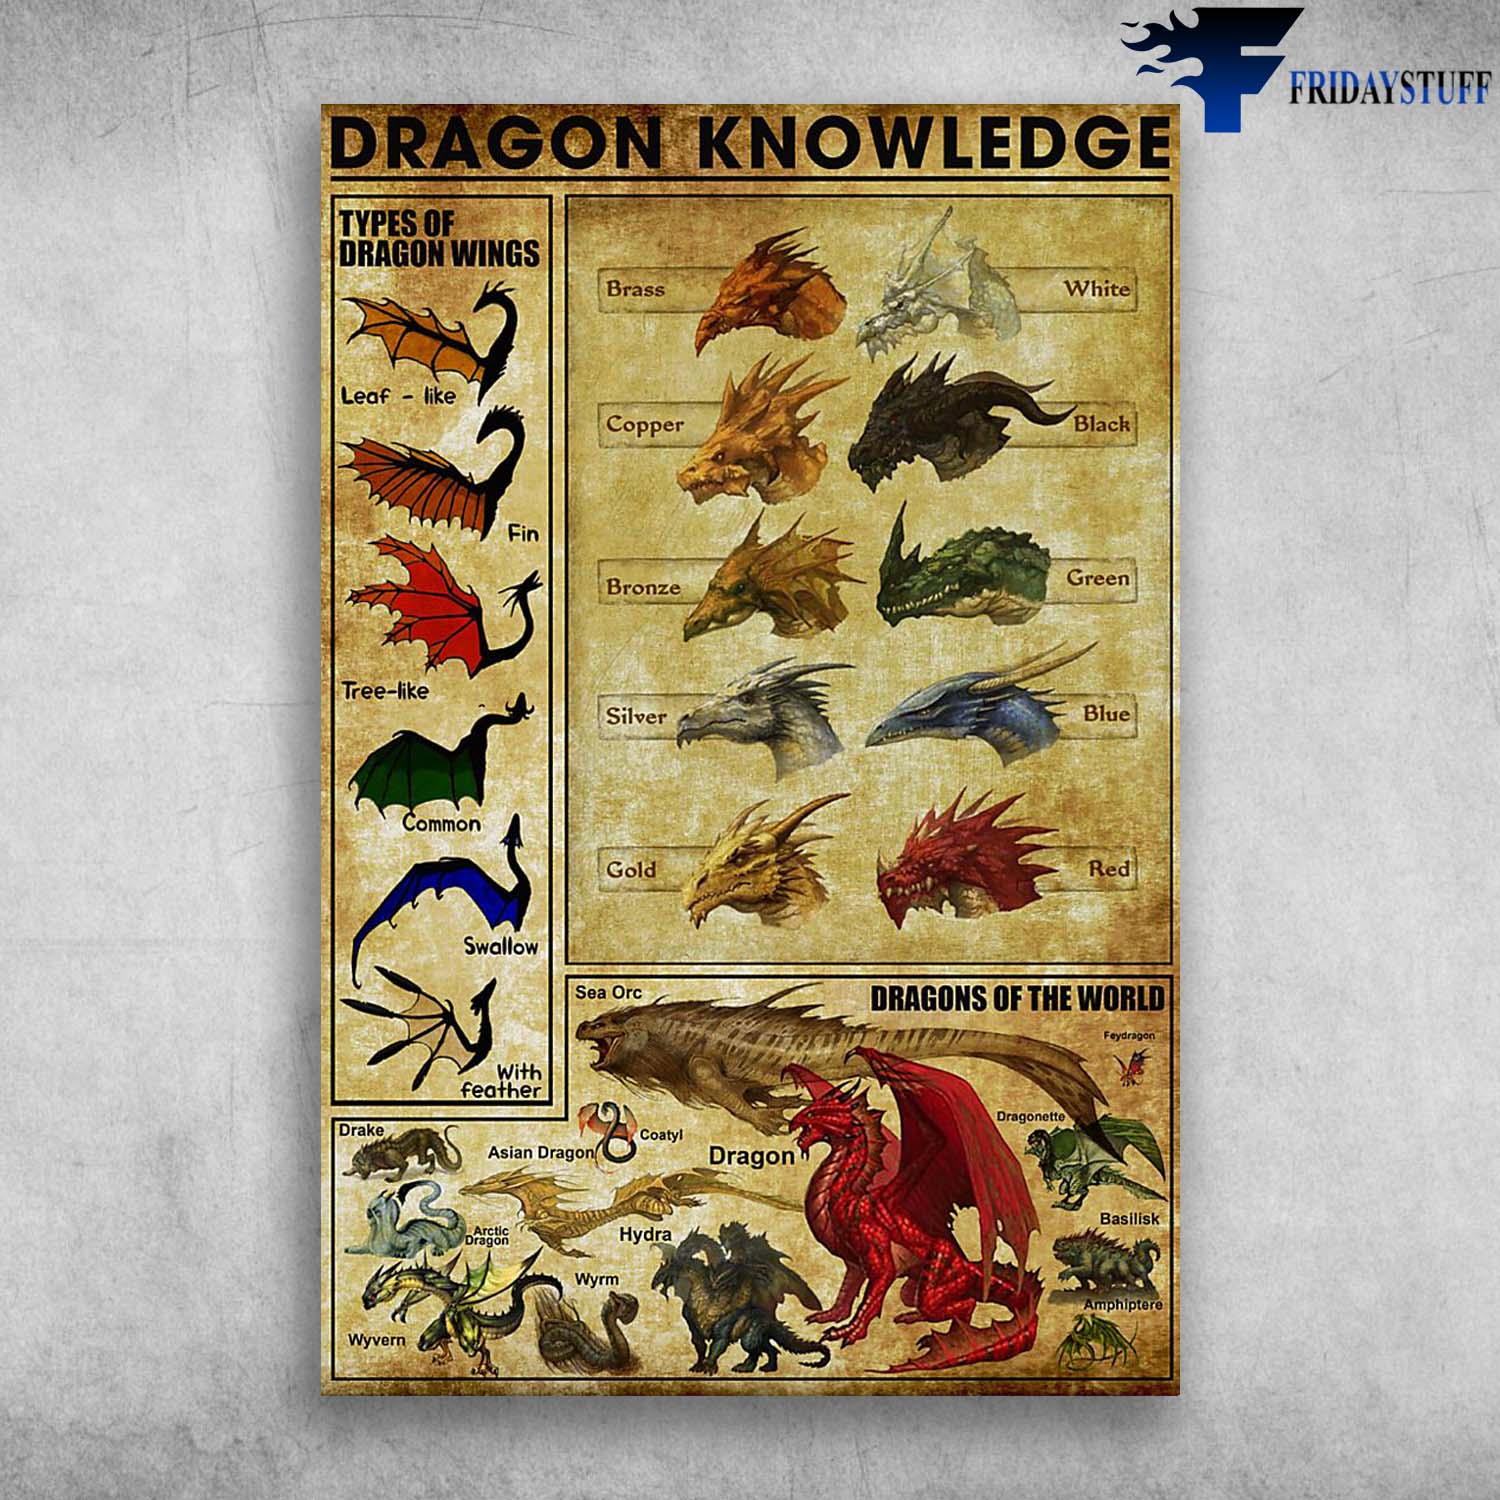 Dragon Knowledge - Types Of Dragon Wings